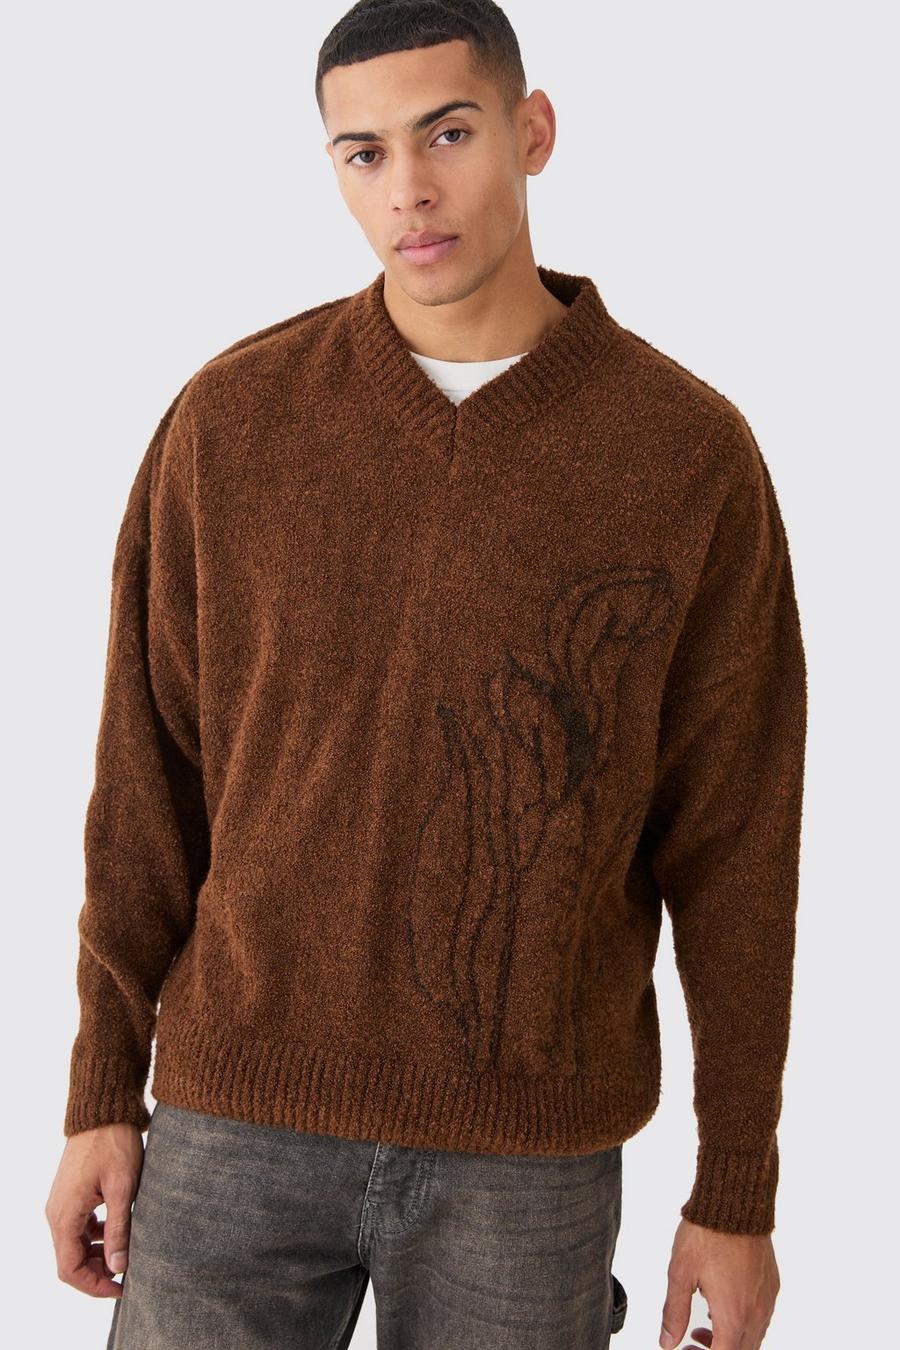 Rust Boxy V Neck Boucle Textured Knit Jumper